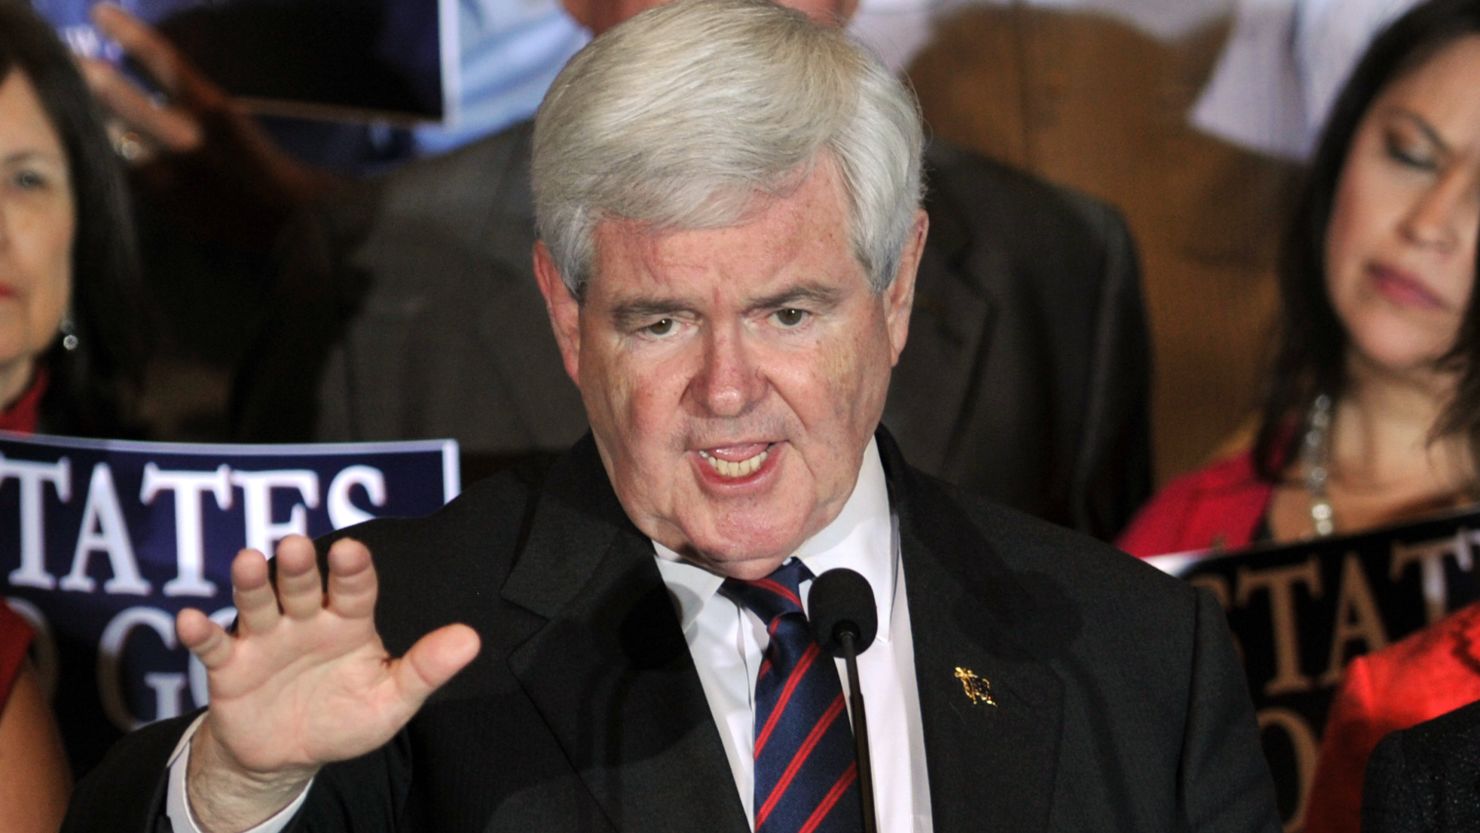 Republican presidential hopeful Newt Gingrich just didn't have the money and organization to win in Florida.